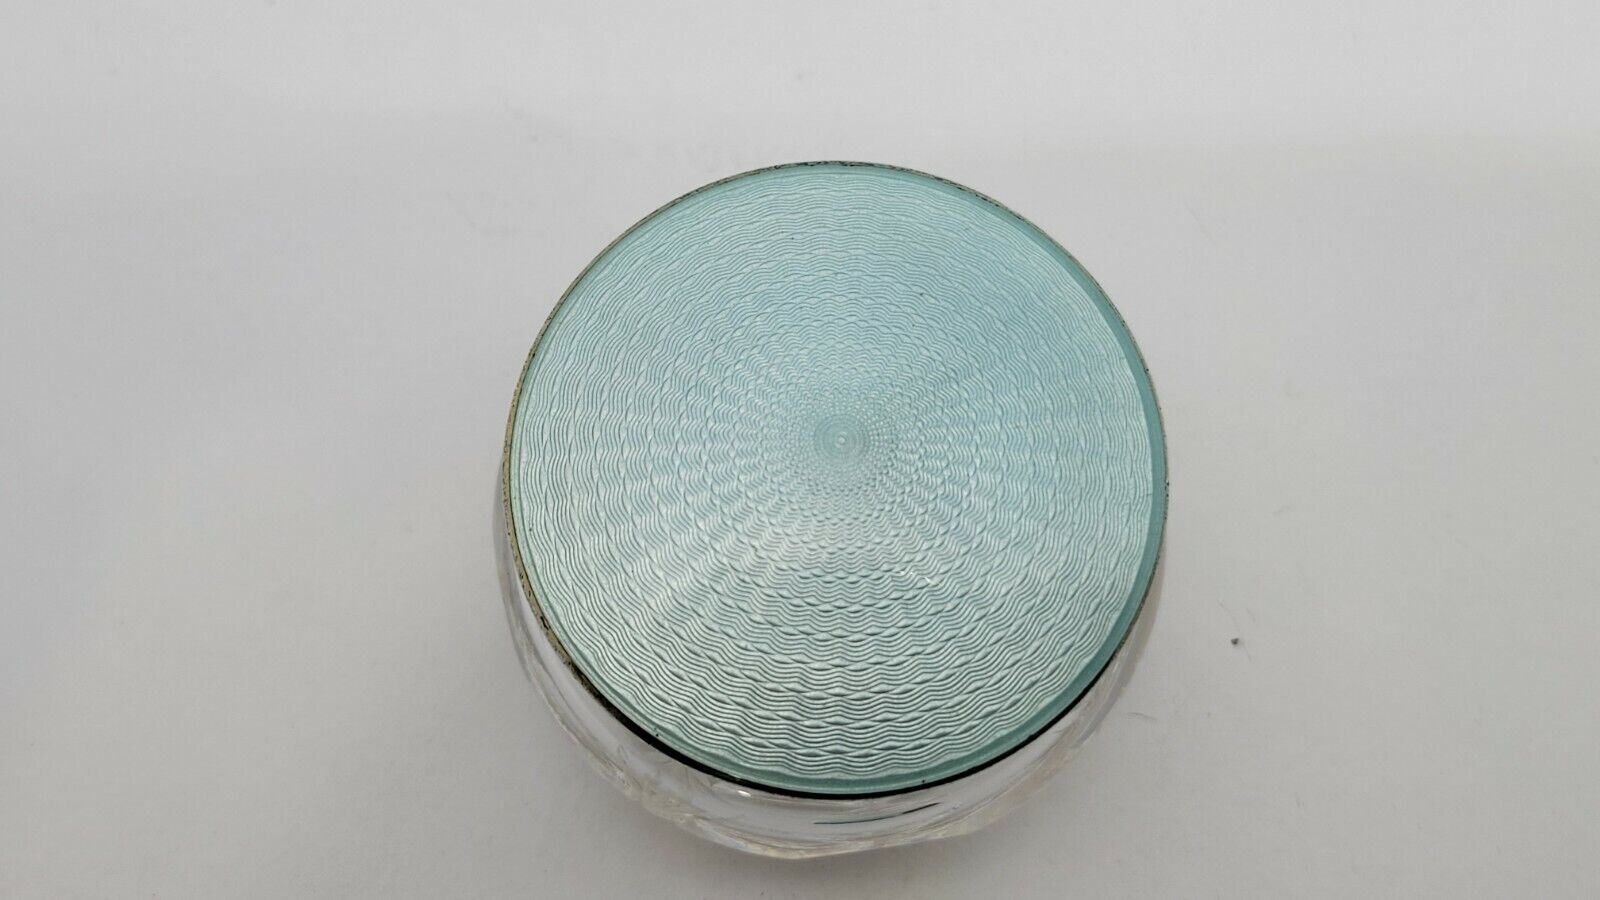 Antique Sterling Silver Guilloche Enamel and Cut Glass Powder Jar